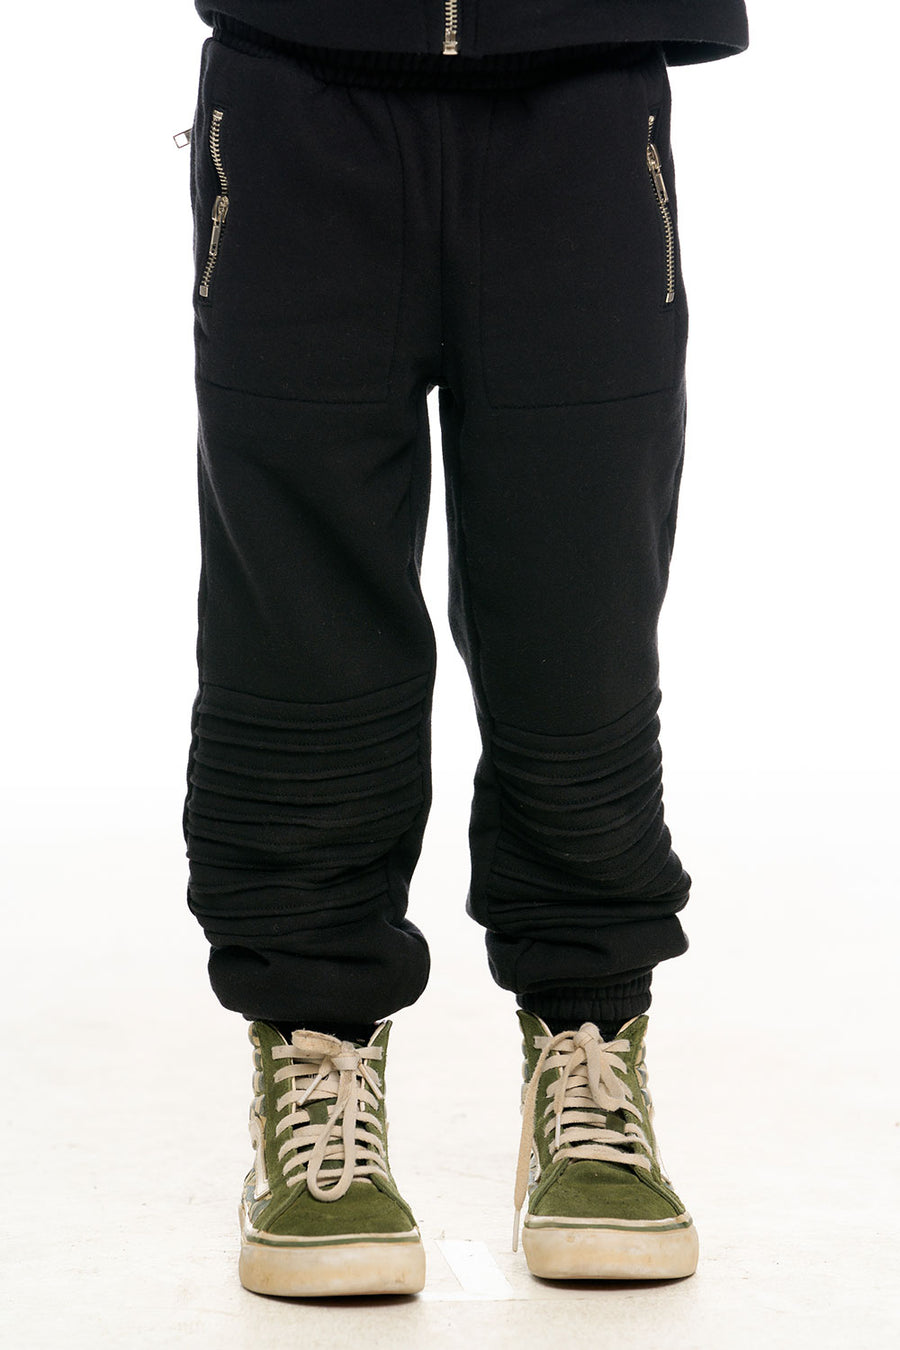 Moto Joggers BOYS chaserbrand